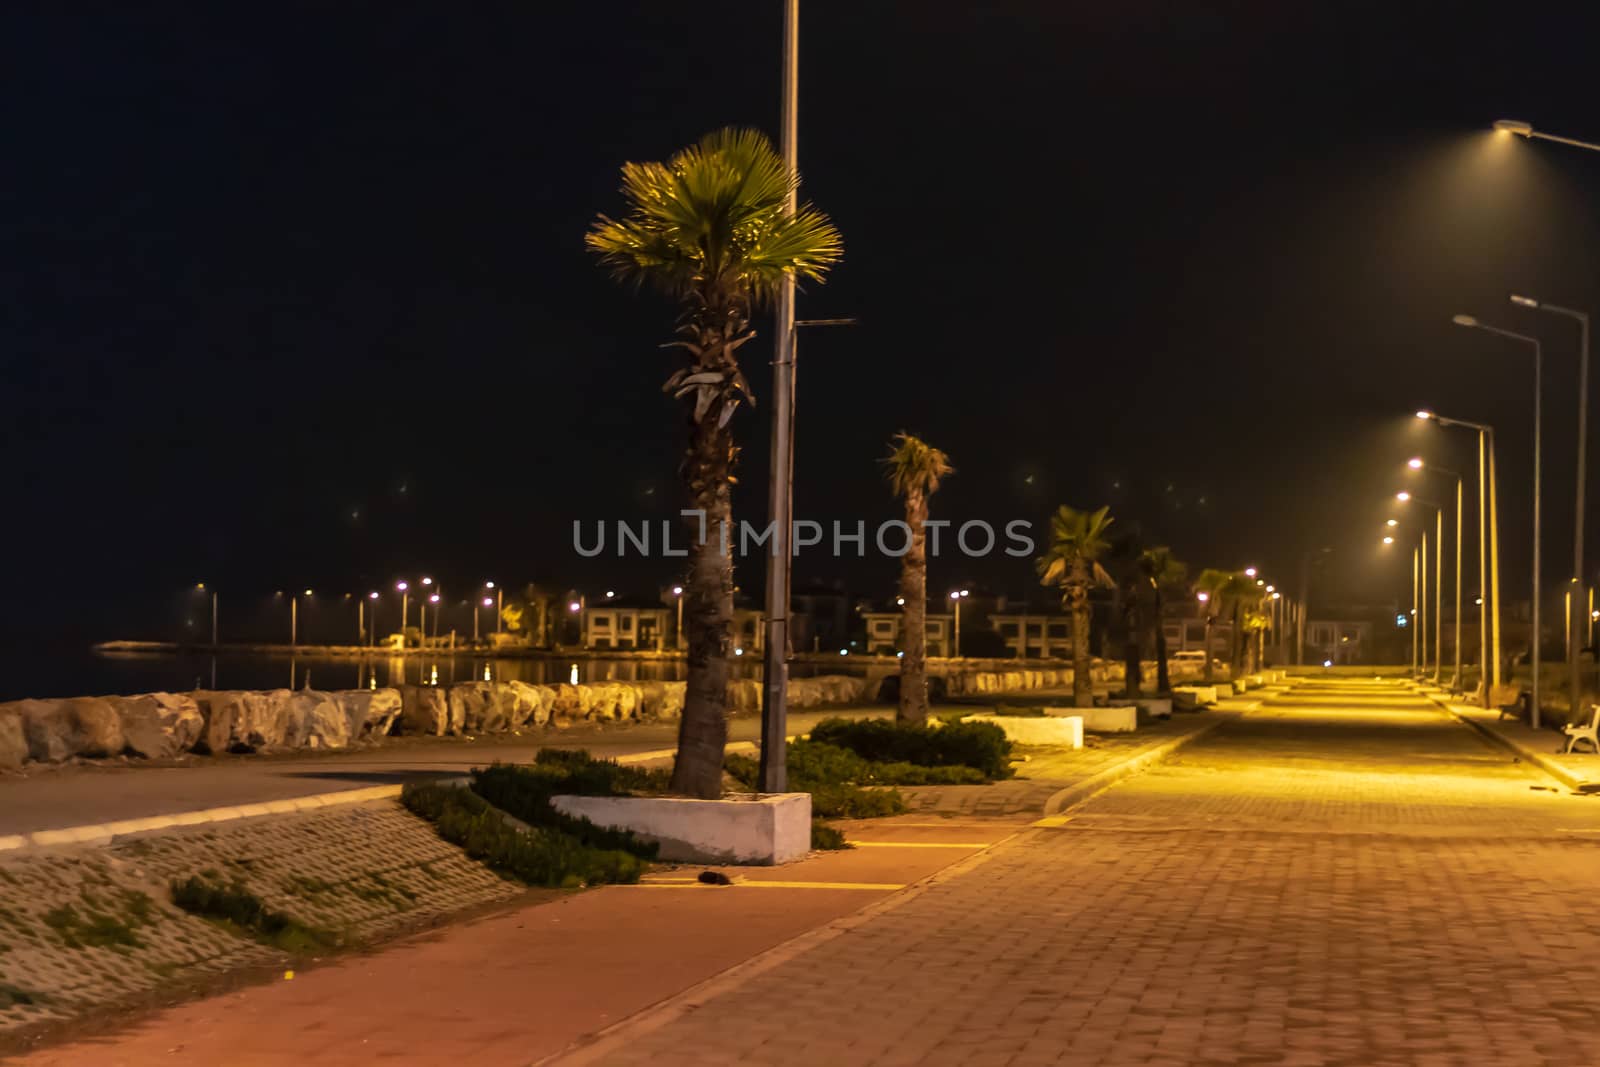 a wide view night shoot from coastal road - palm trees and city lights. photo has taken at izmir/turkey.